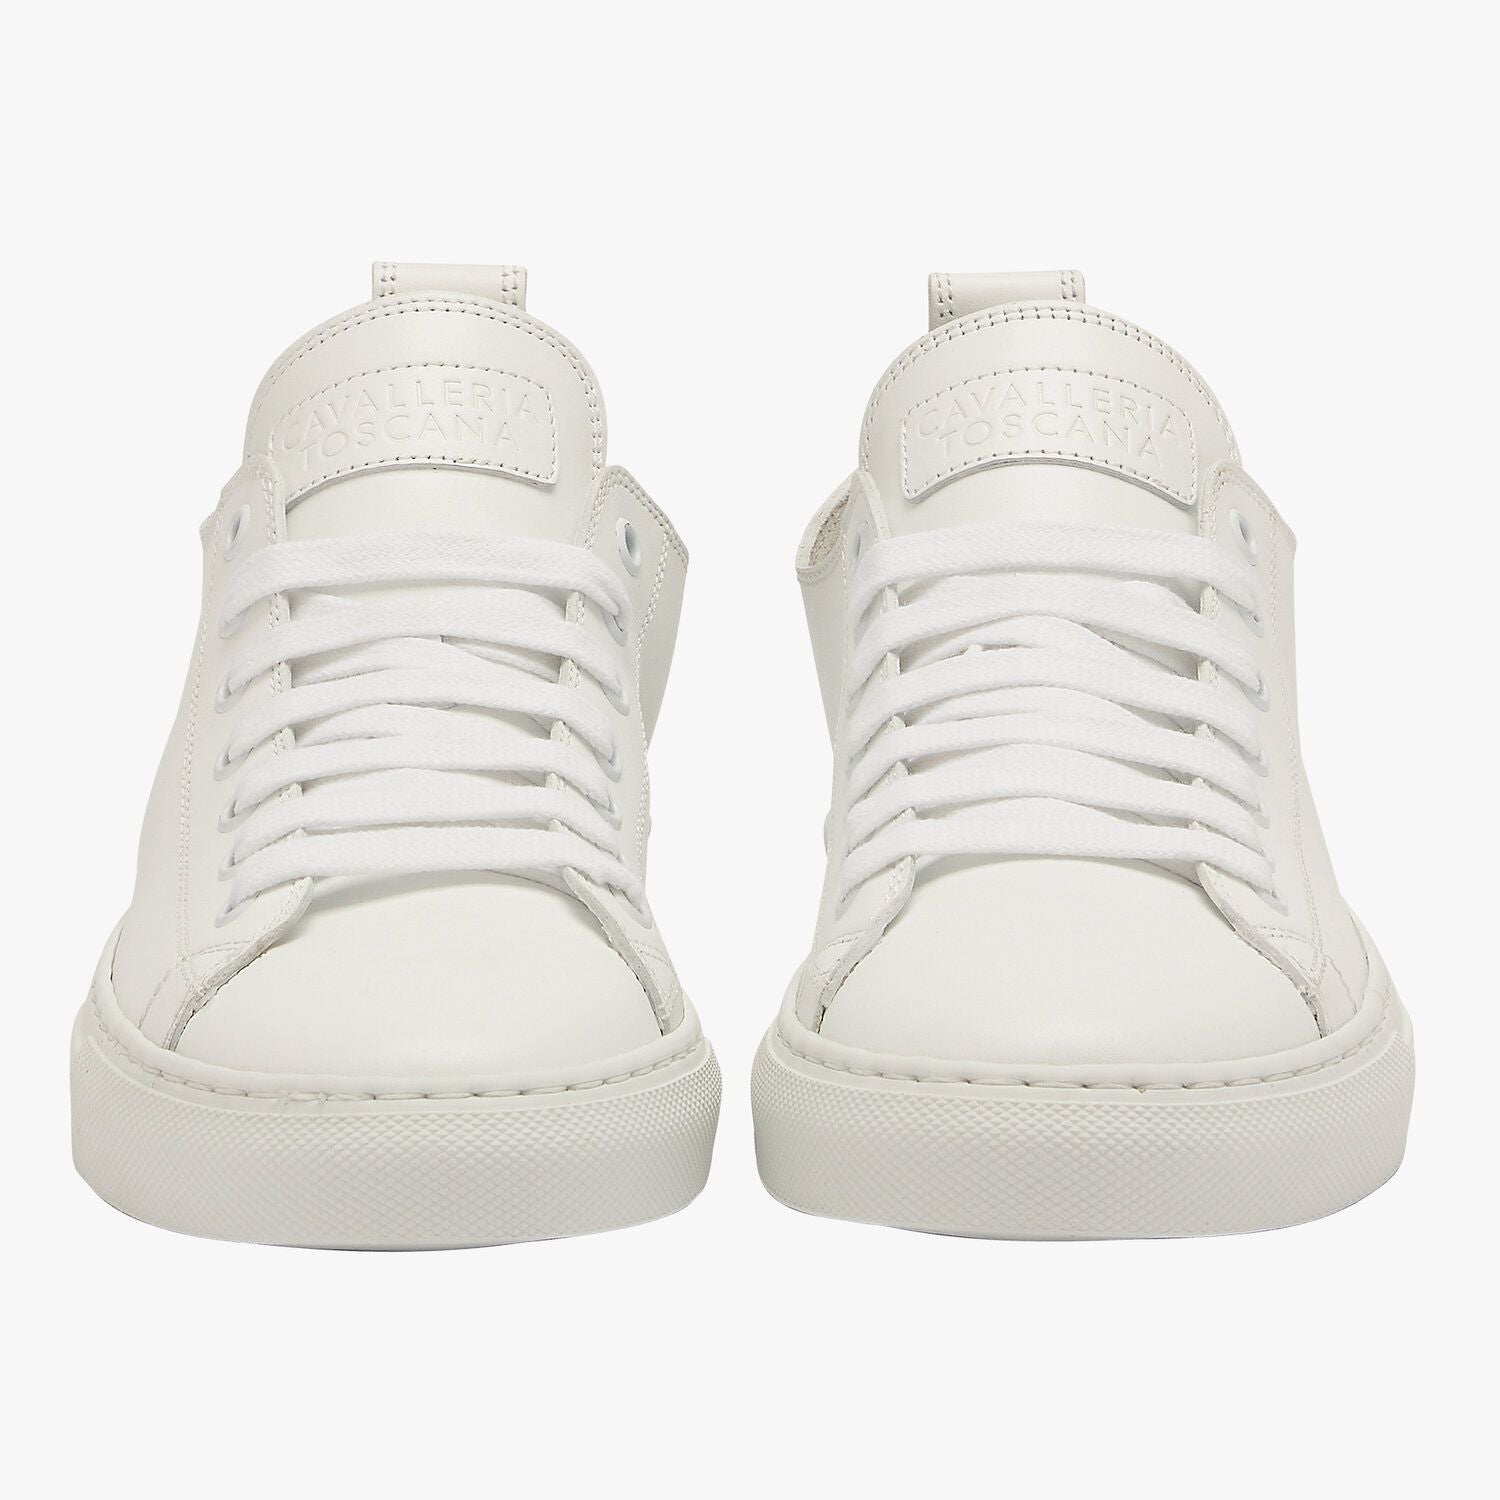 Cavalleria Toscana Leather Lace Up Sneaker